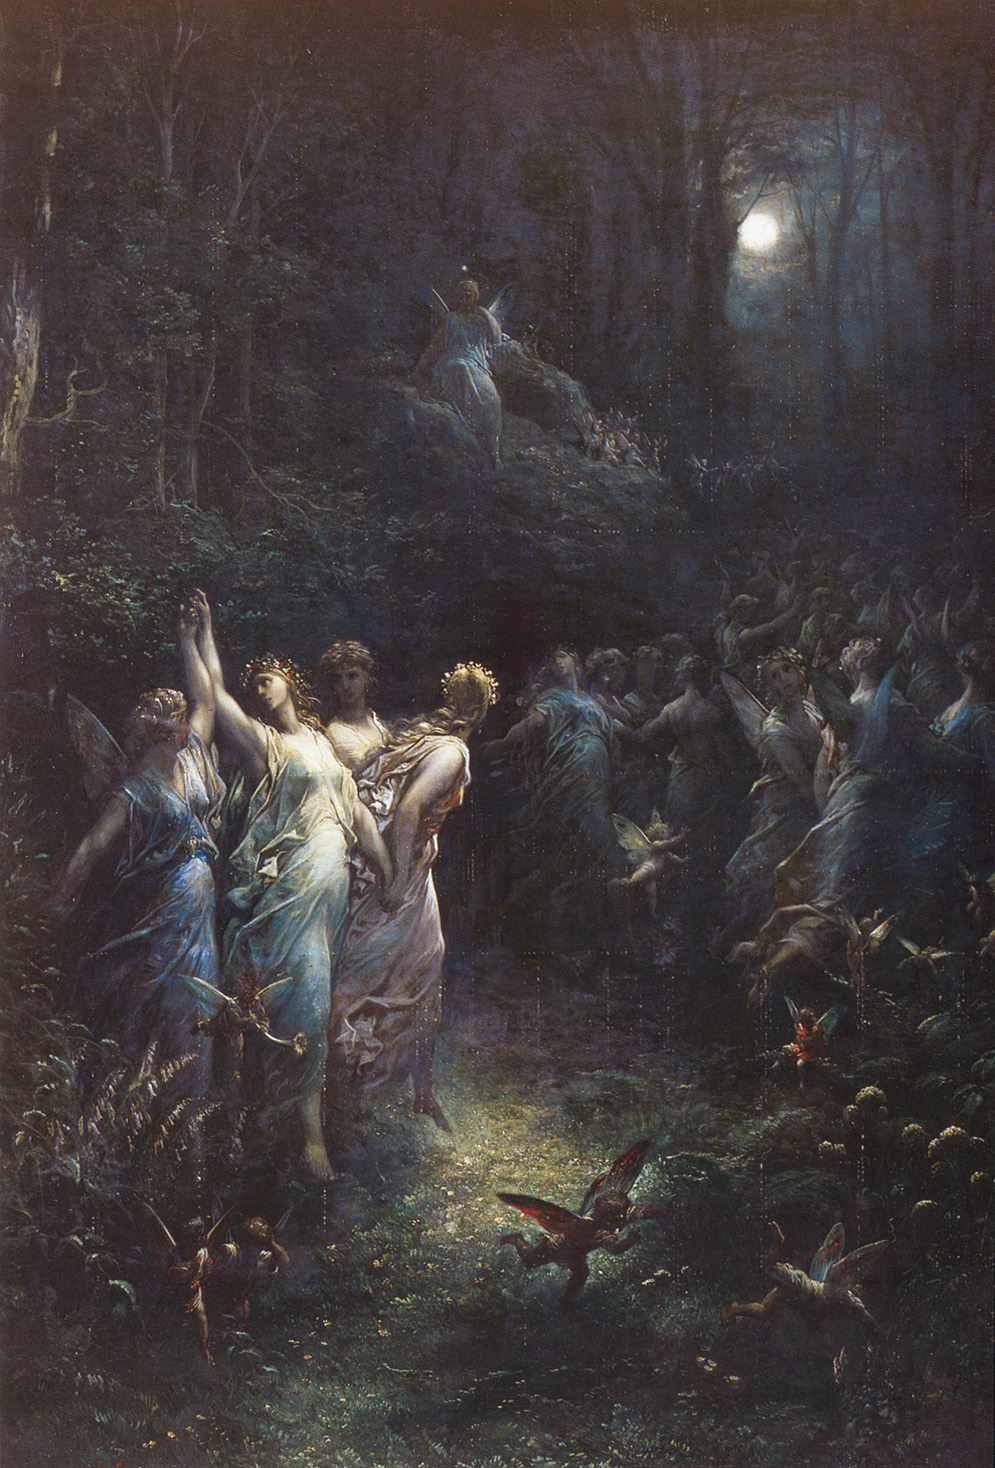 A large group of fairies dance in a moonlit forest.